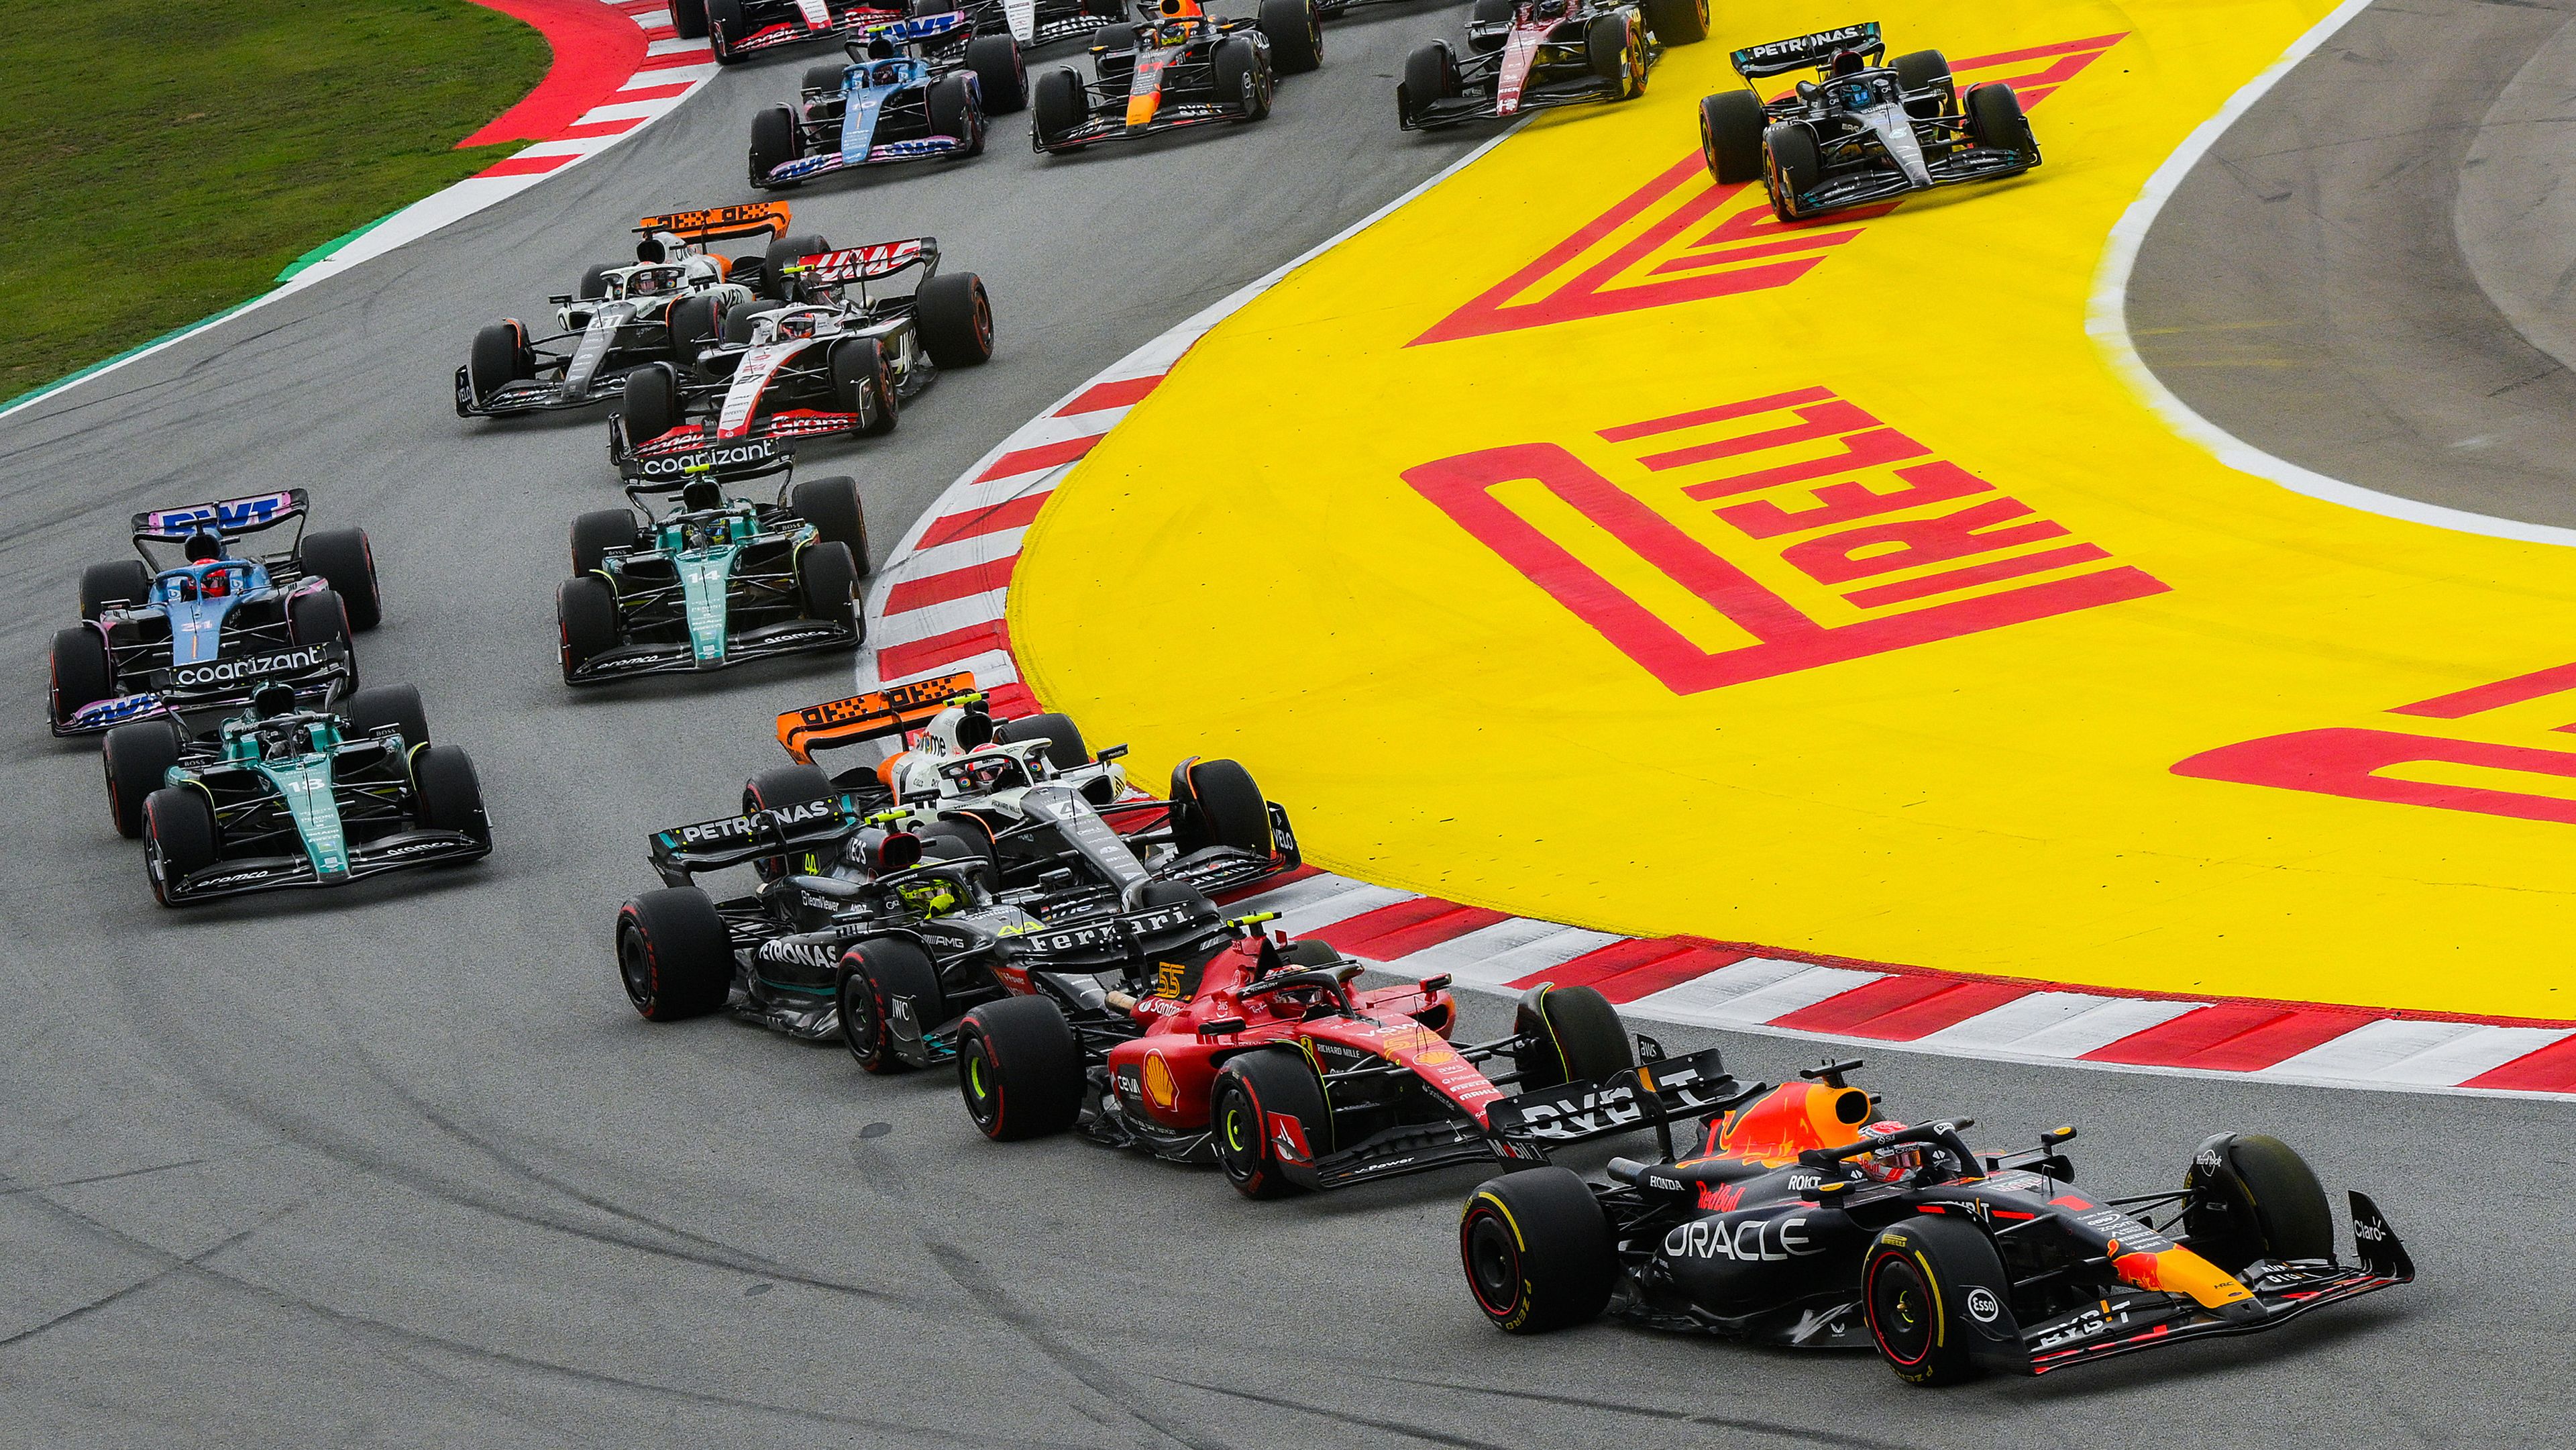 Max Verstappen leads Carlos Sainz and the rest of the field at the start during Formula 1 Spanish Grand Prix.